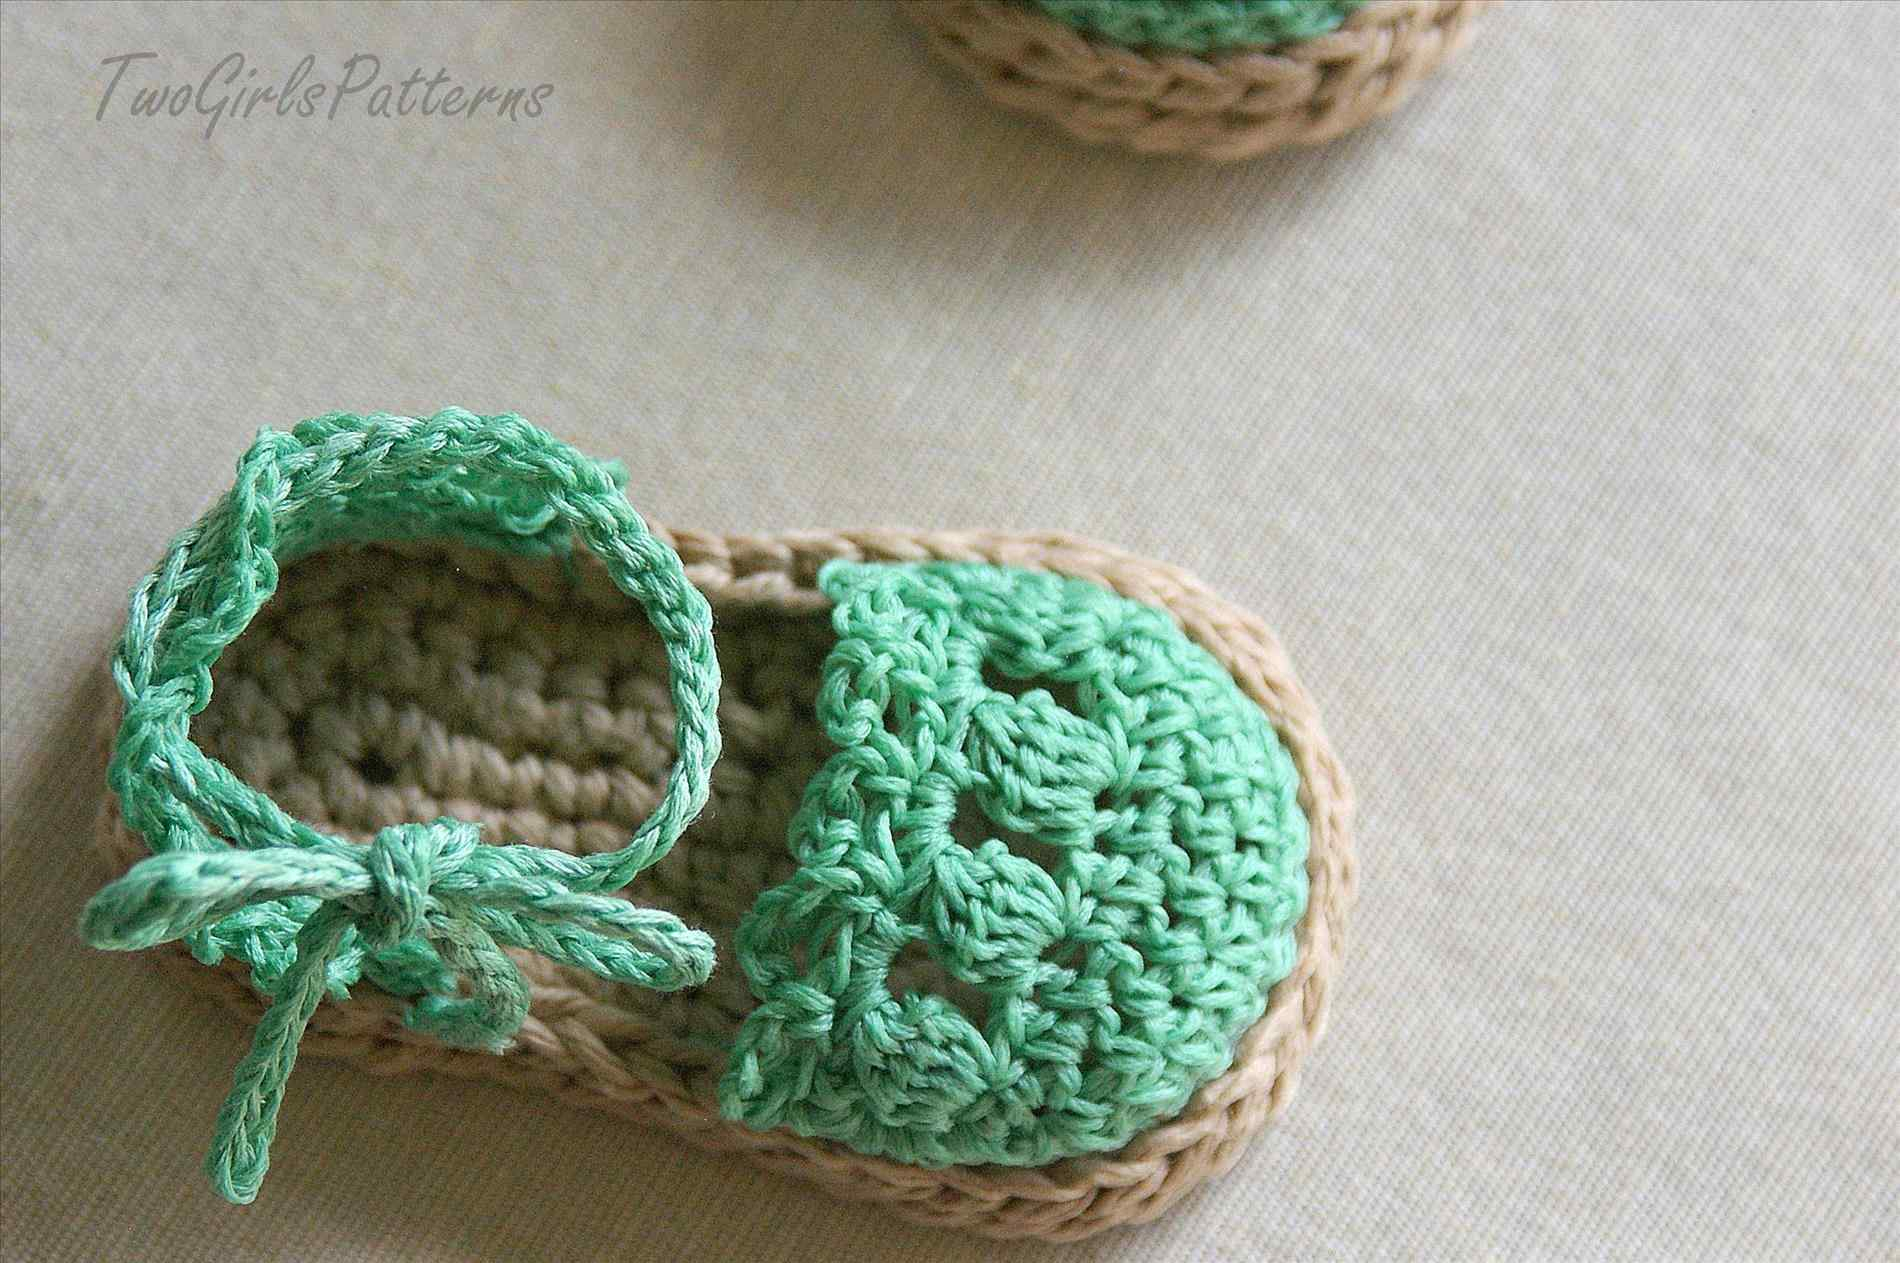 Free Pattern For Baby Sandals To Crochet How Crochet Ba Sandals Pattern Book To Flipflops Months